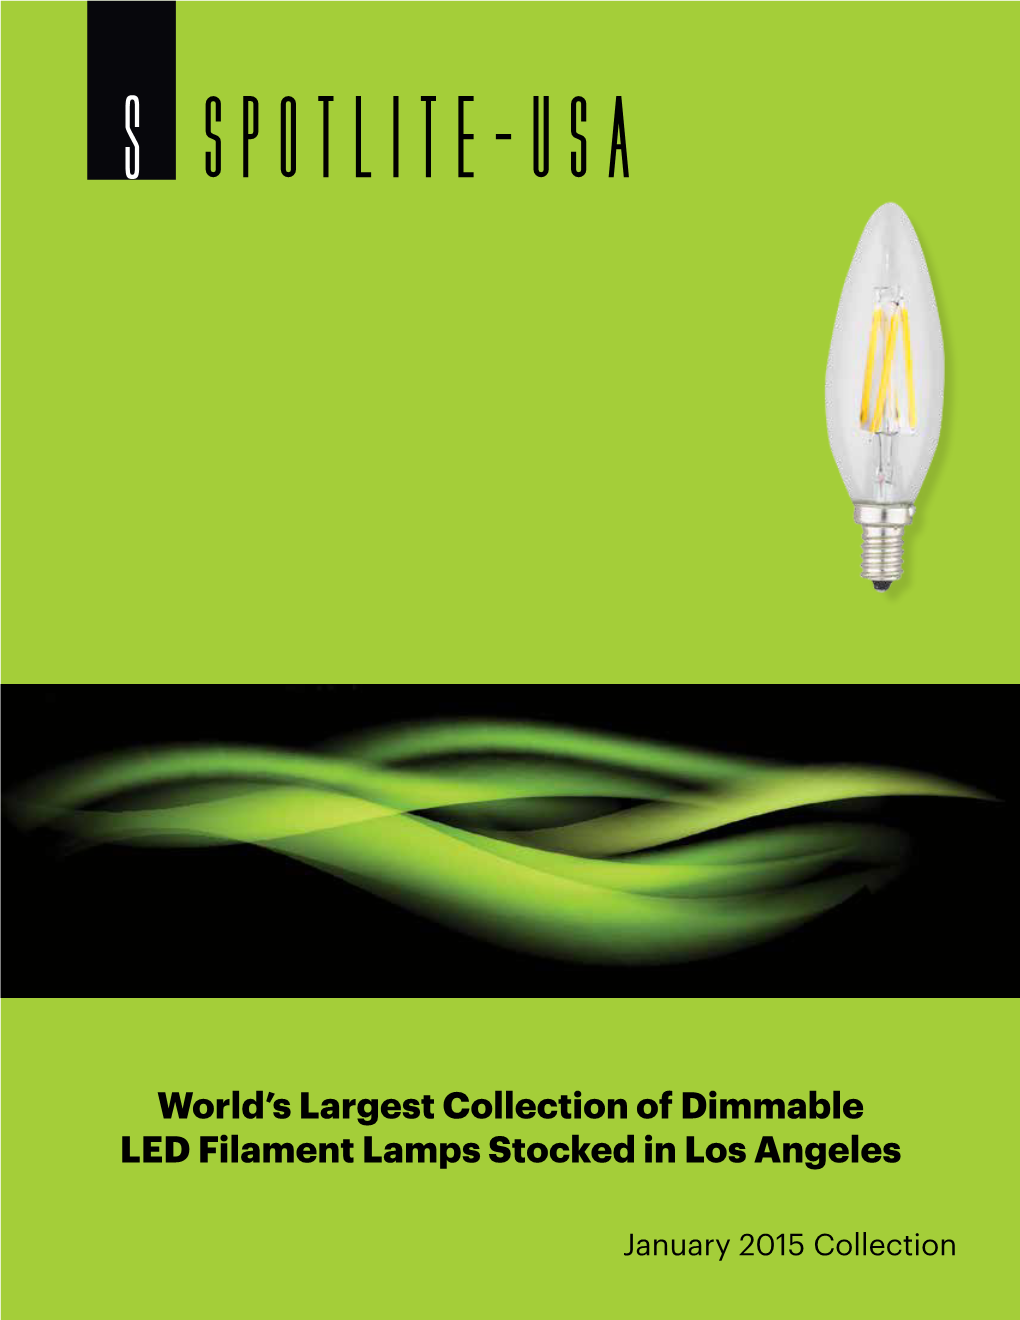 World's Largest Collection of Dimmable LED Filament Lamps